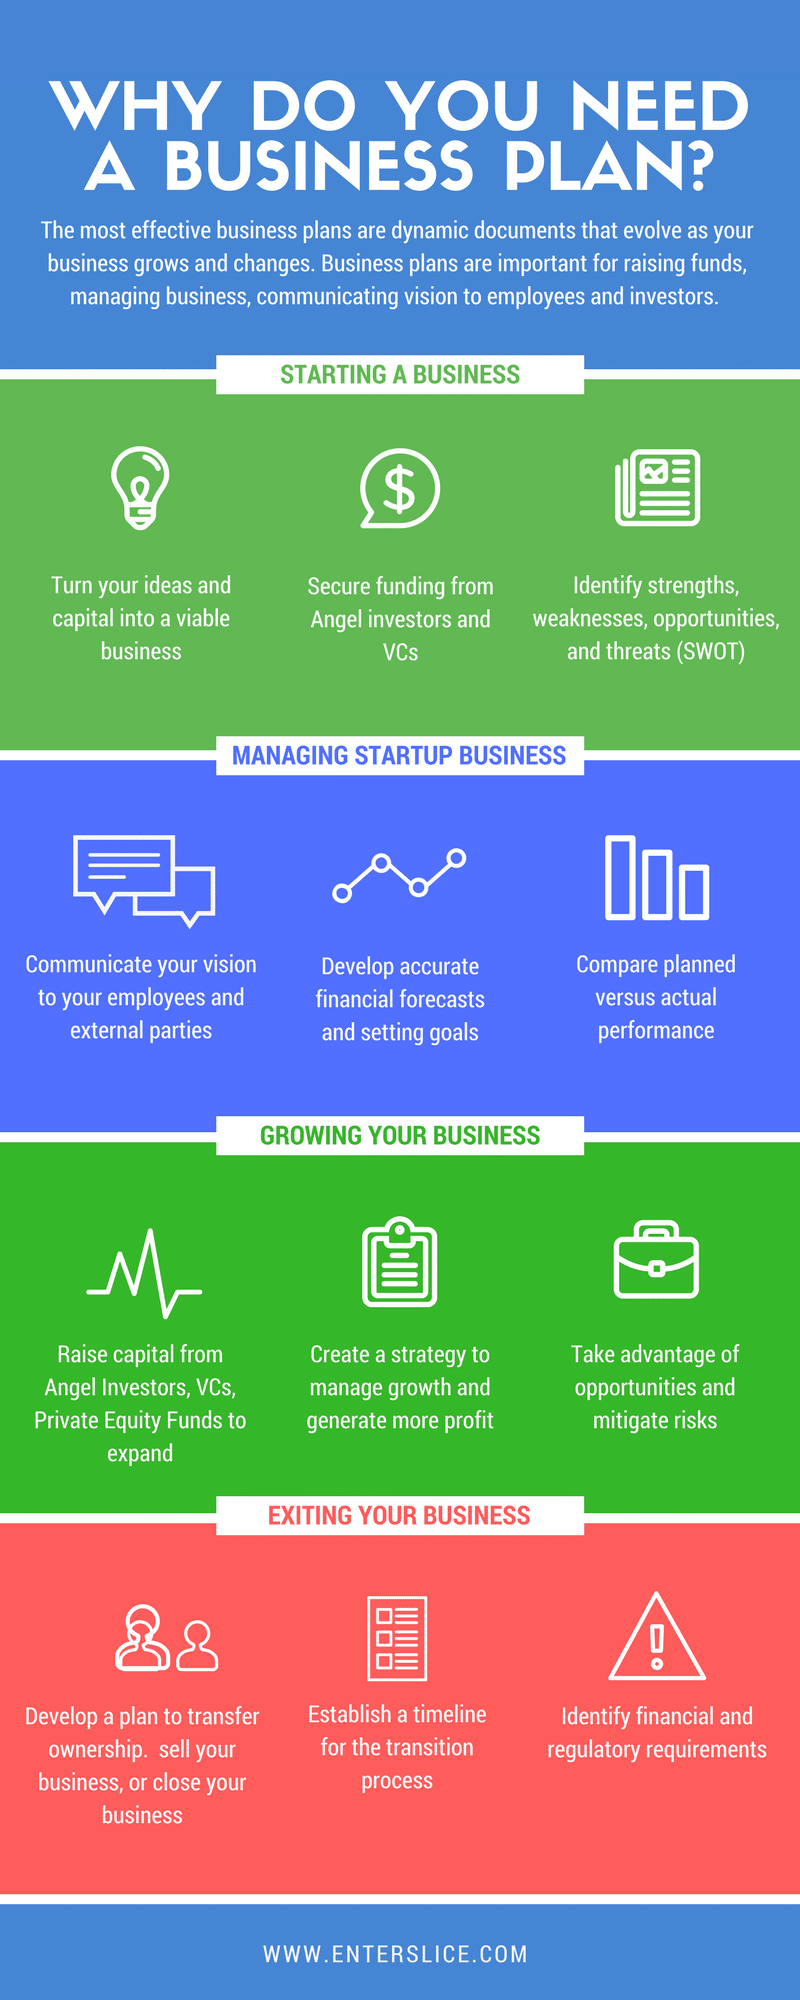 need help creating a business plan